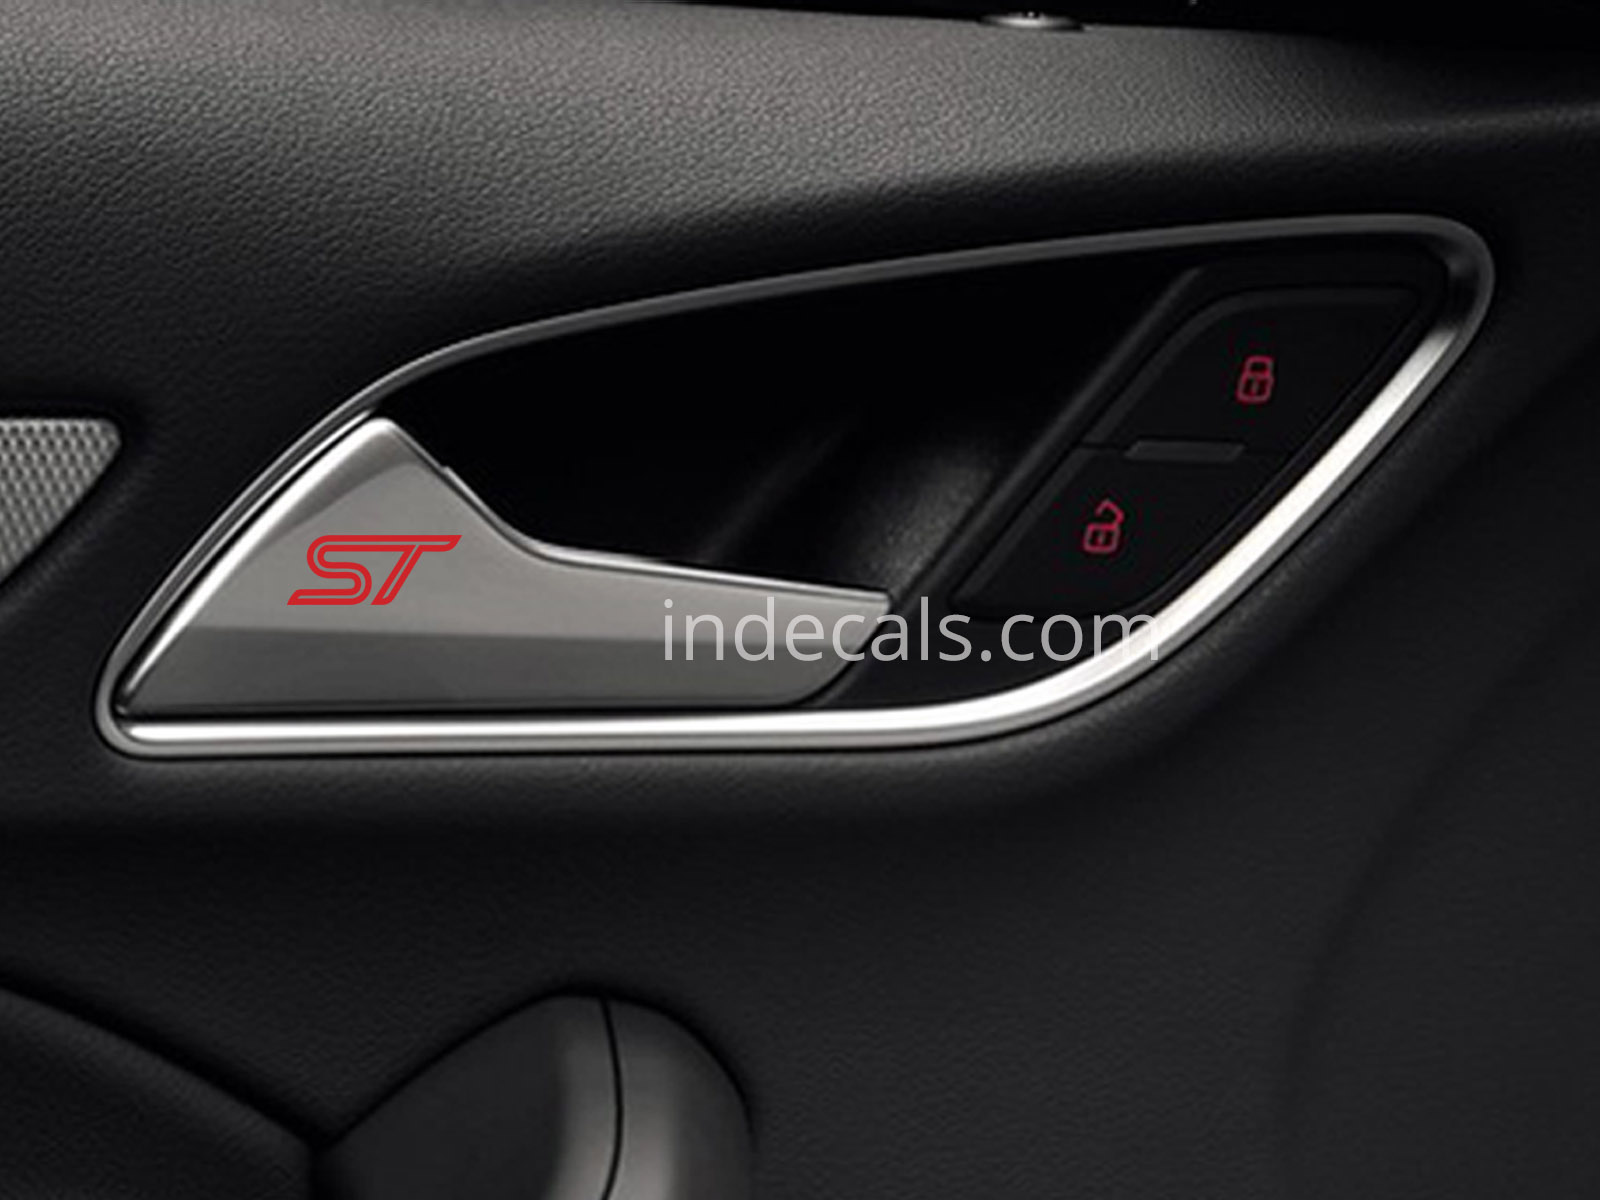 6 x Ford ST Stickers for Door Handle - Red